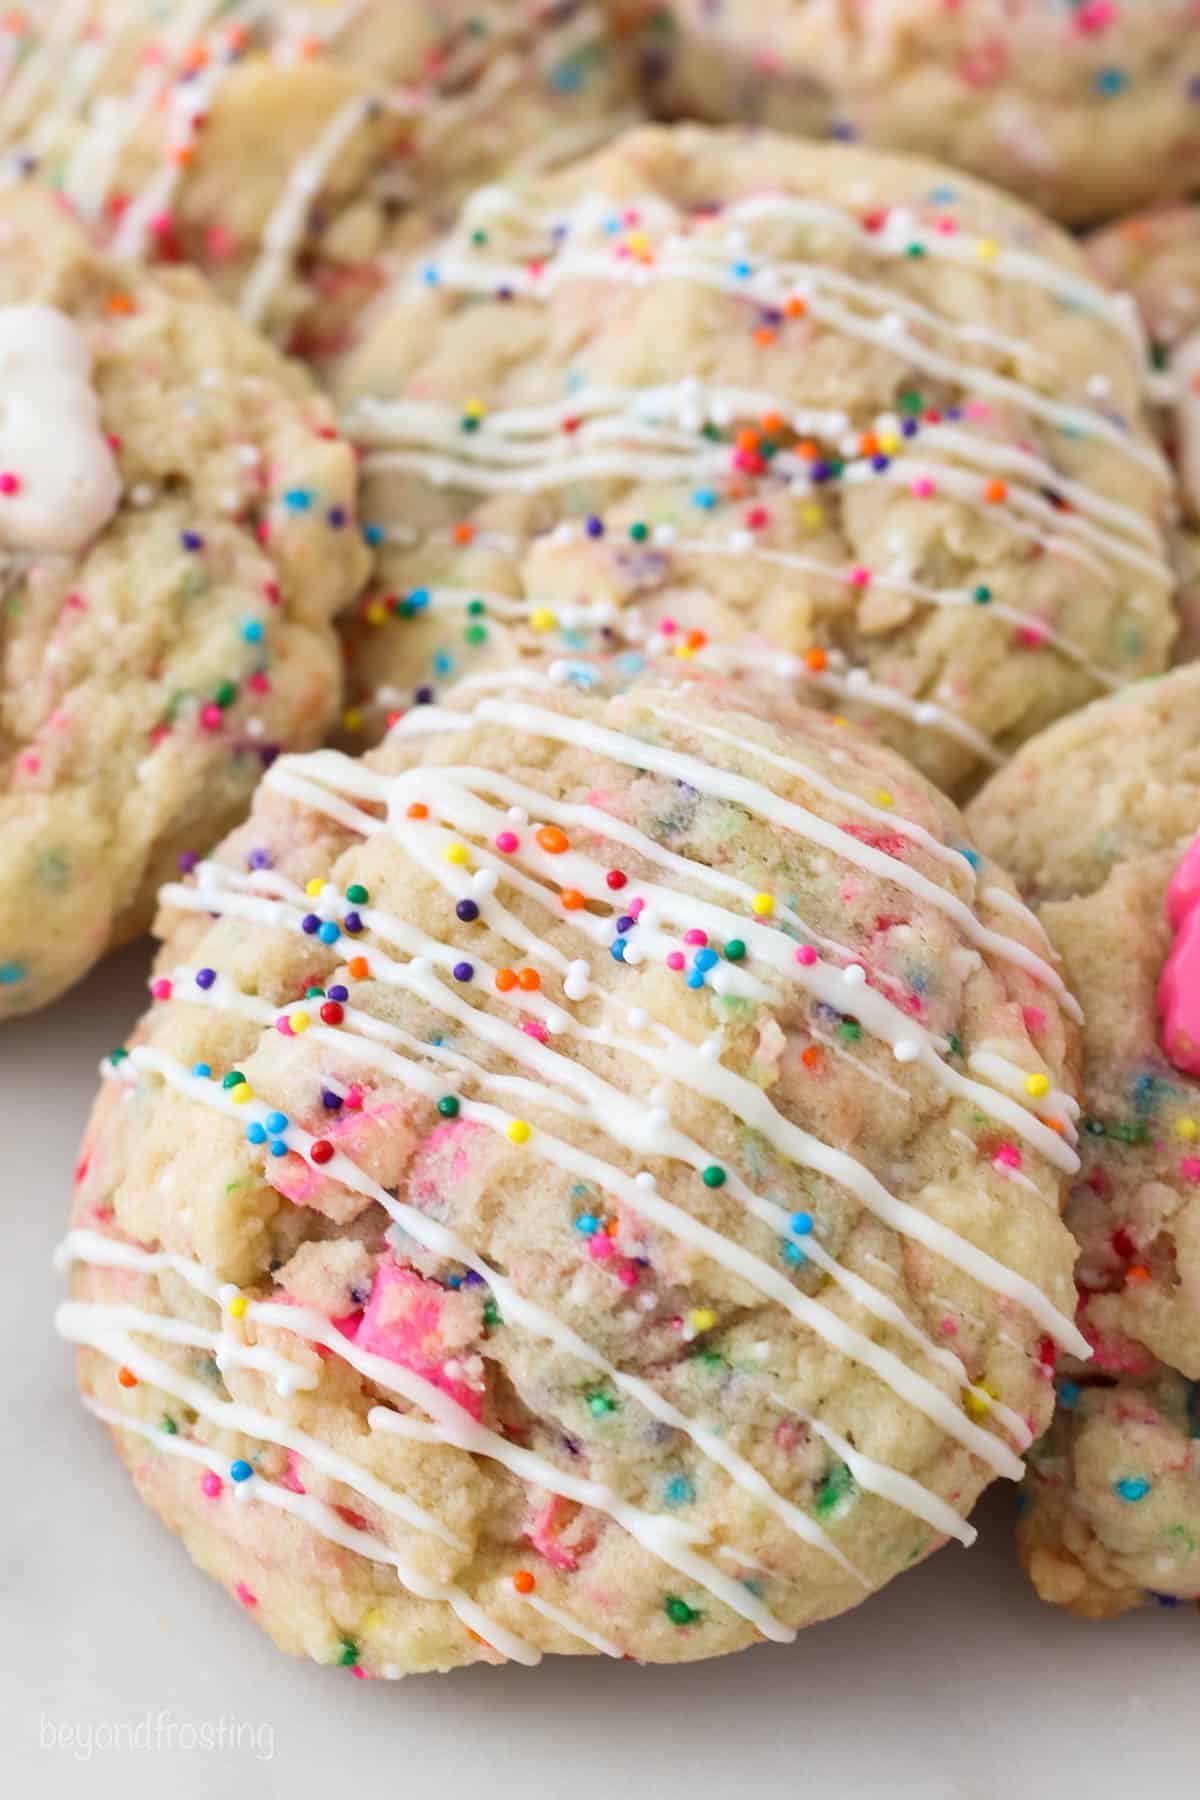 A tray of Circus Animal Stuffed Cookies with white chocolate and sprinkles on top